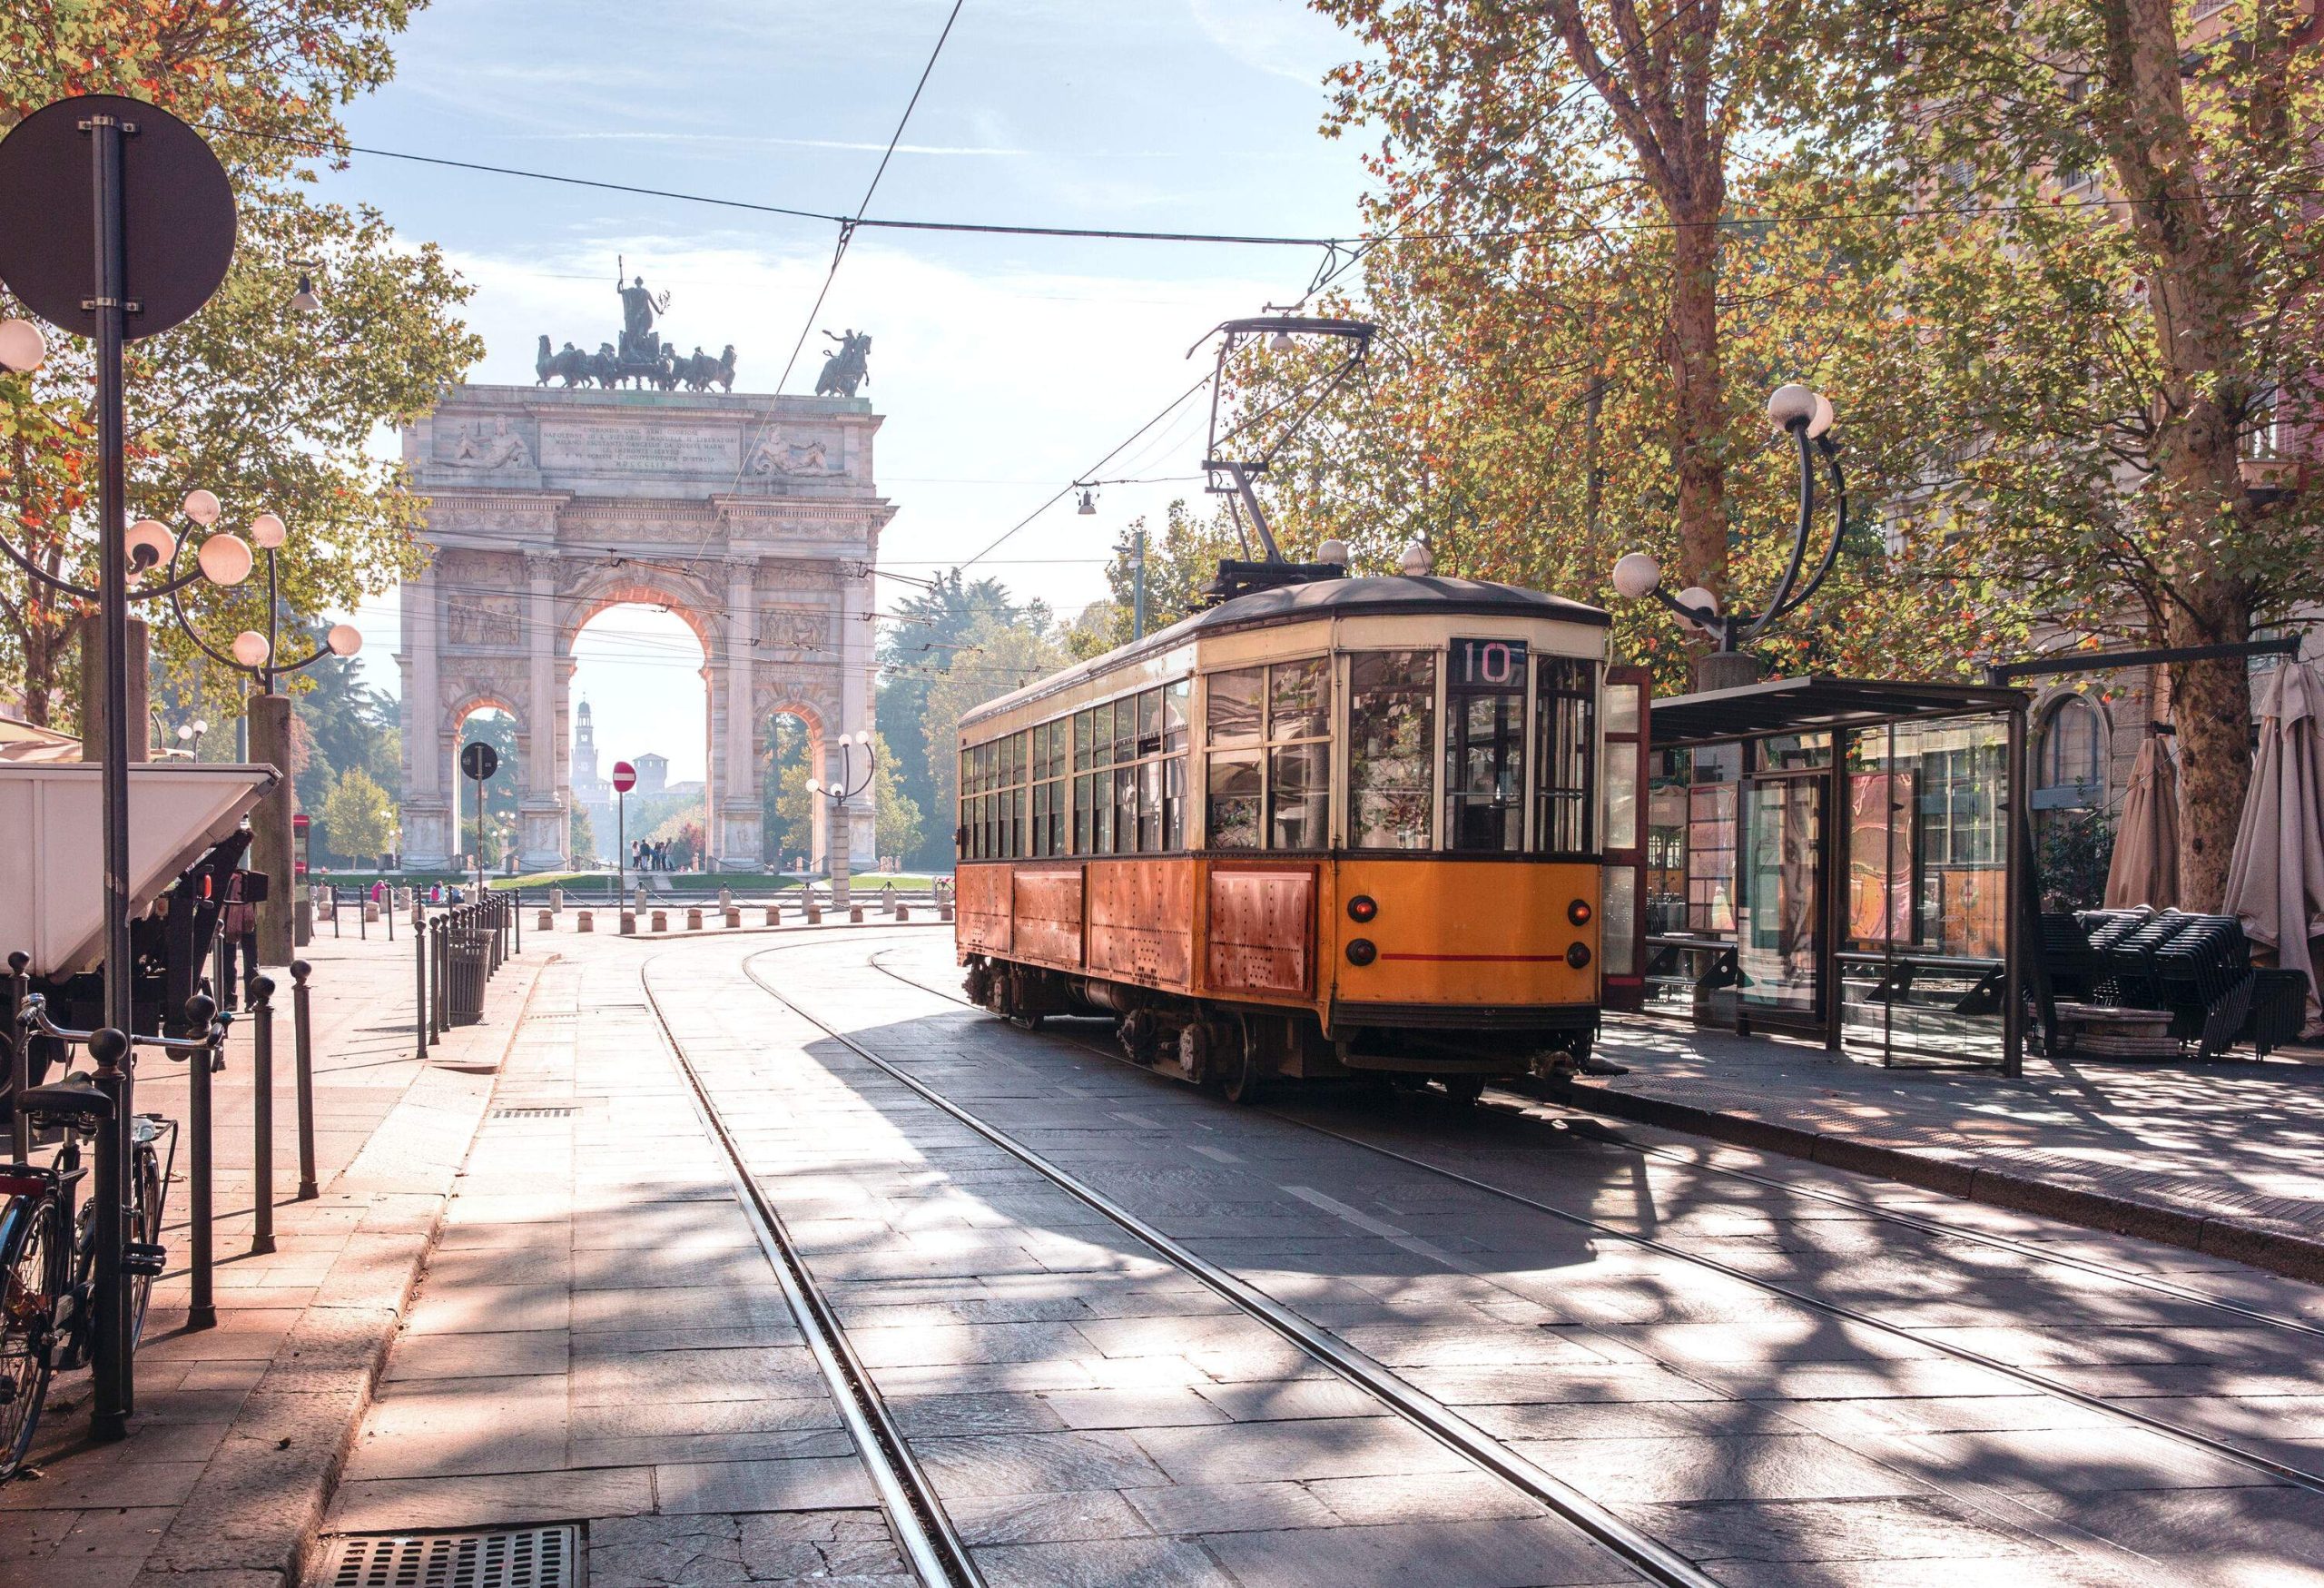 A vintage tram in the centre of an old town against a triumphal arch with bas-reliefs and statues on top.